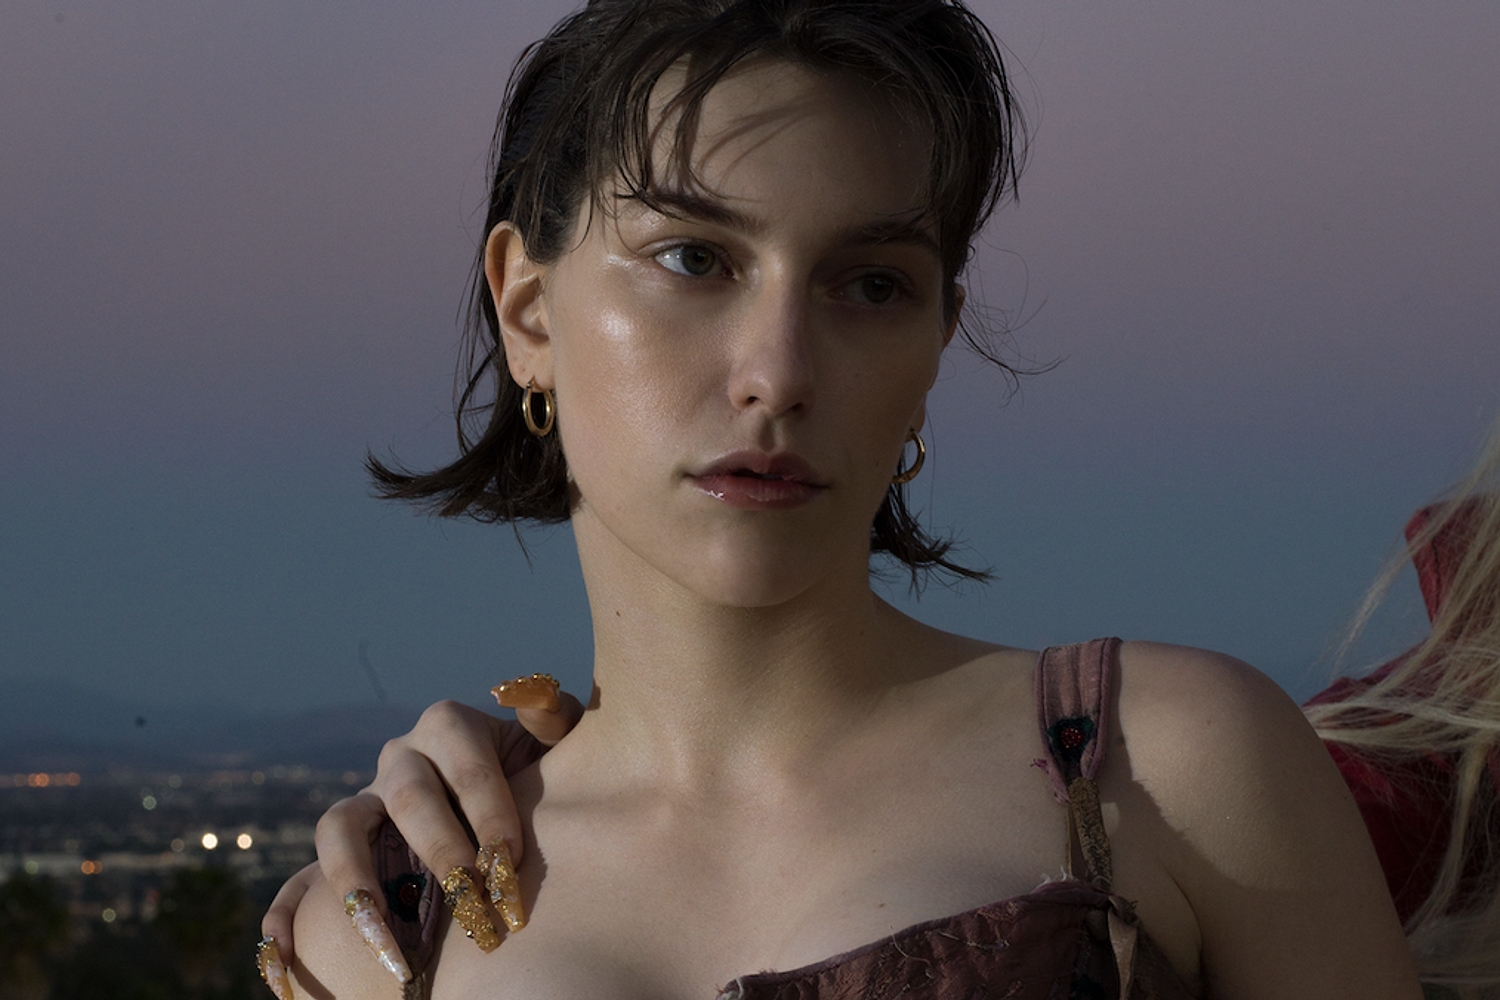 King Princess returns with ‘Only Time Makes It Human’